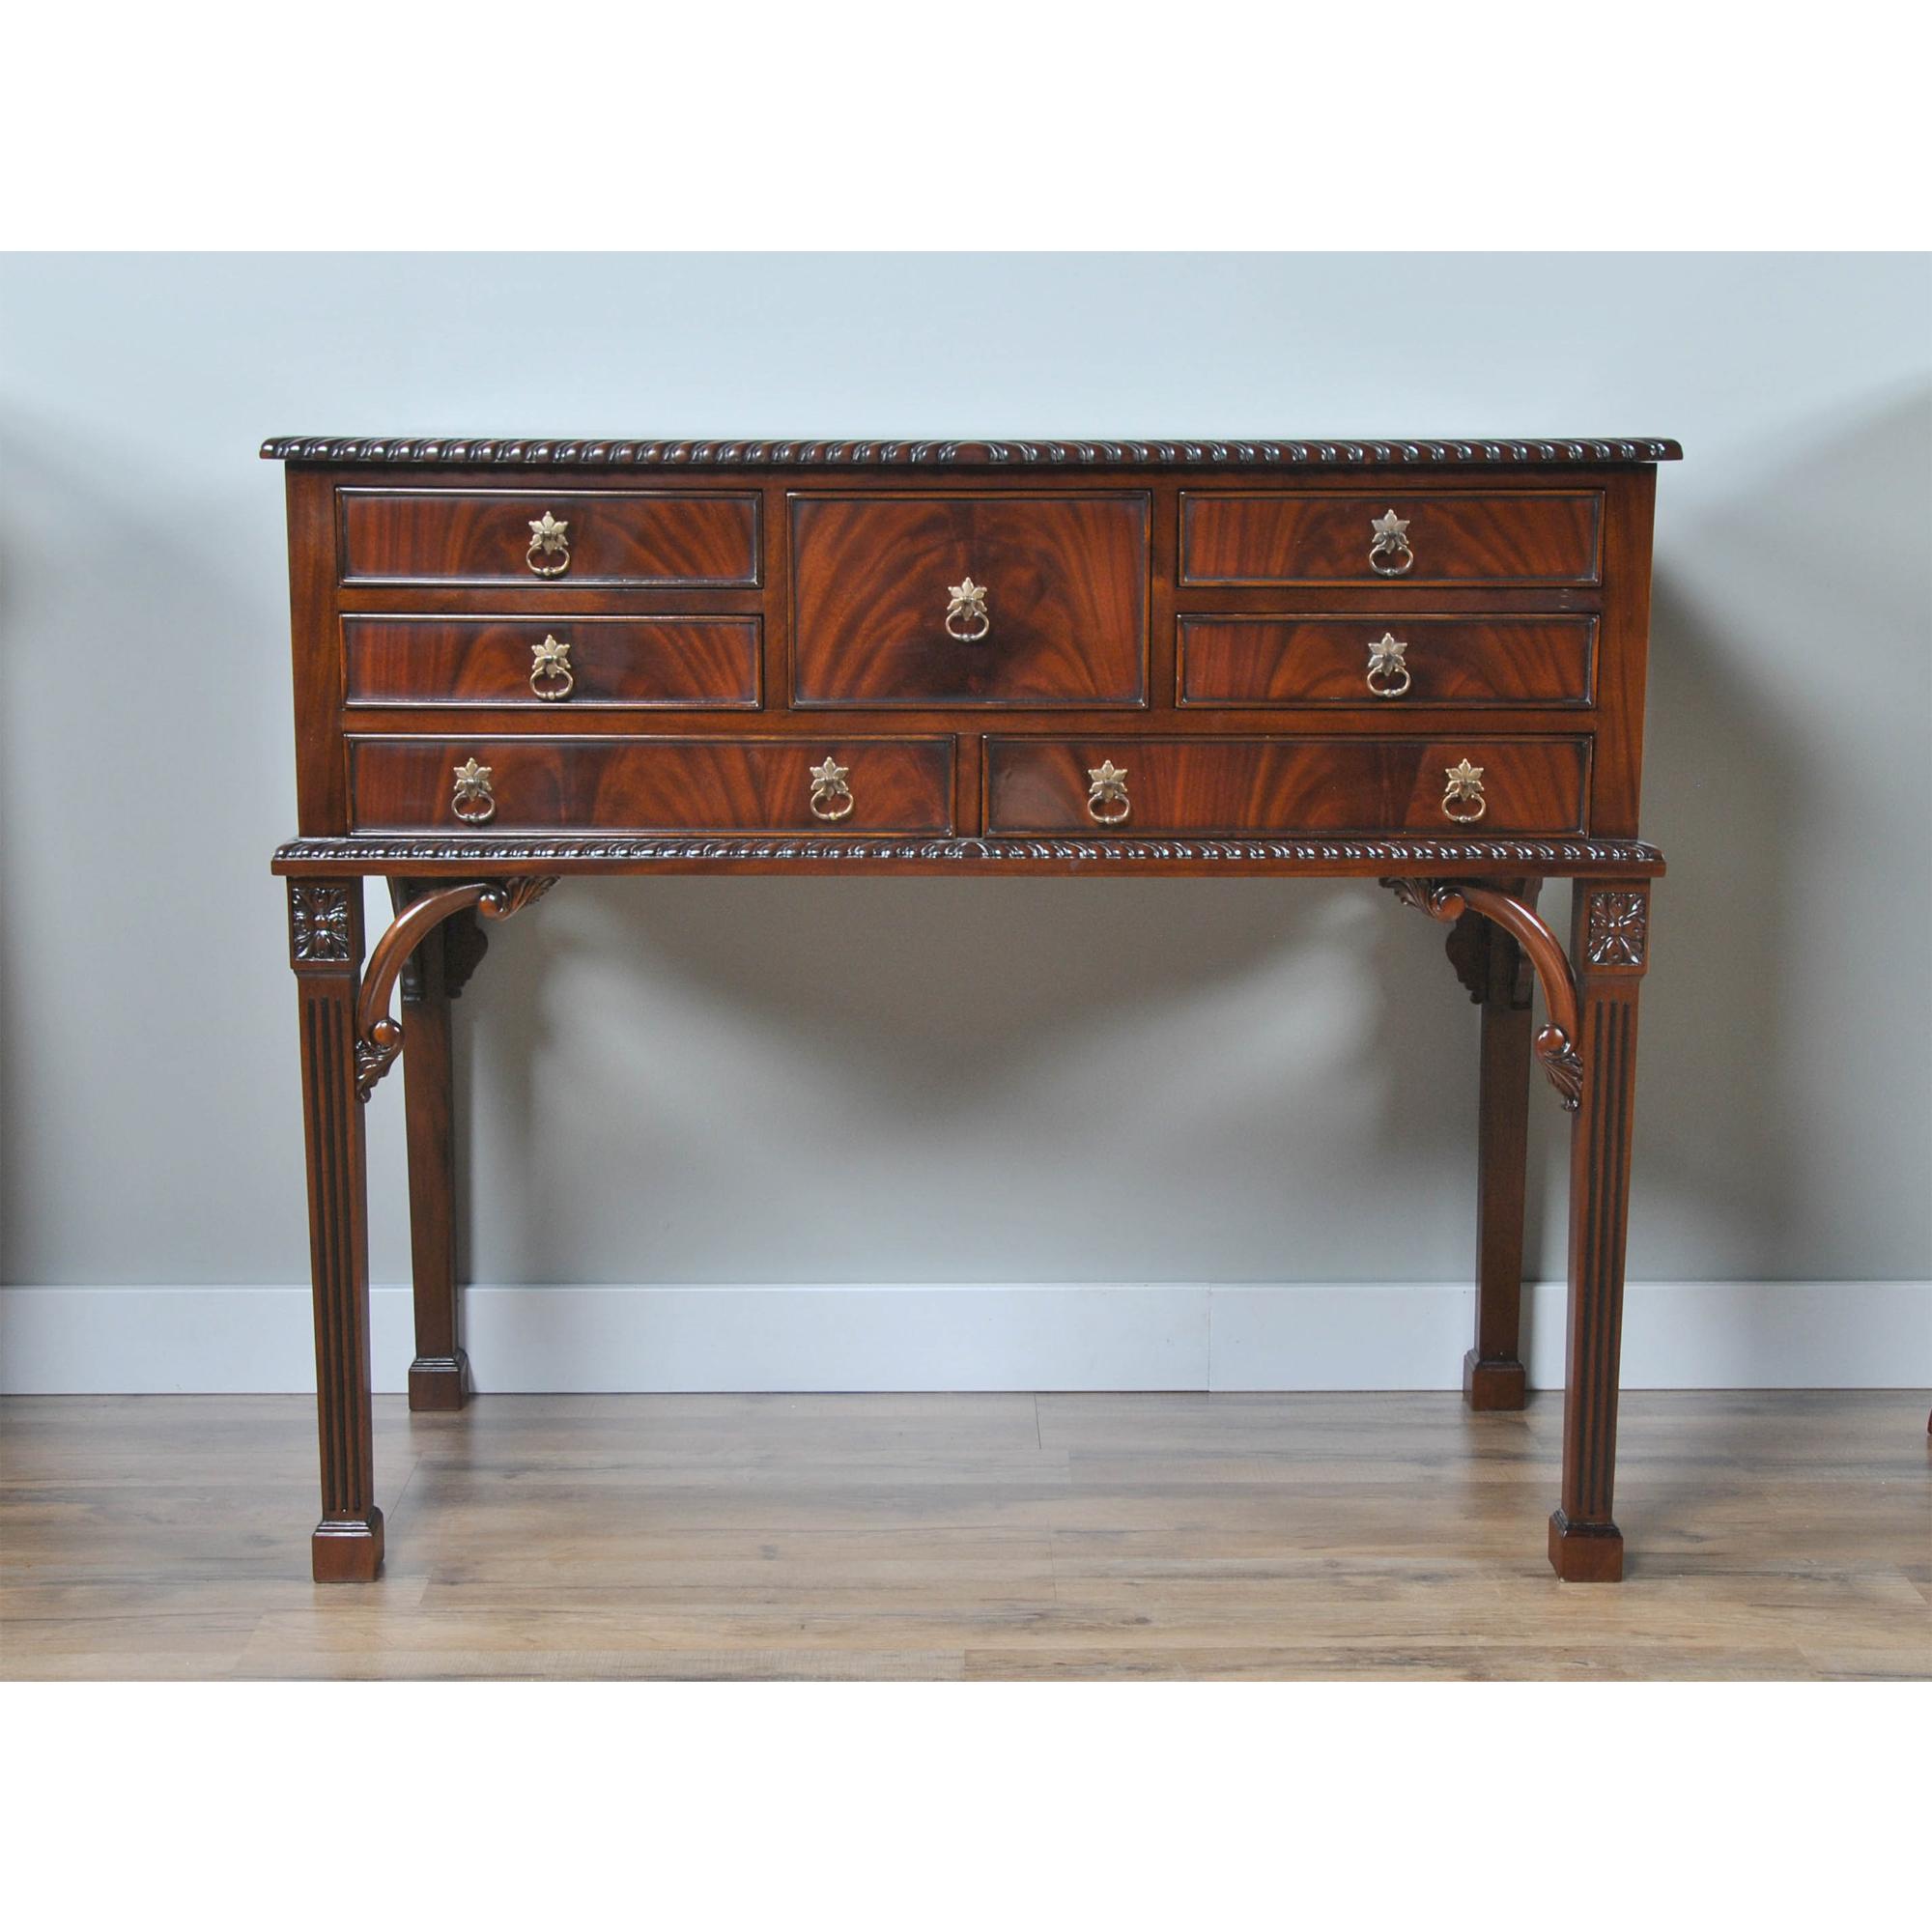 Based on an antique piece of fine furniture this Mahogany Silver Chest from Niagara Furniture is taller than the original antique piece in order to make it more useful for modern living spaces. With seven drawers this sideboard offers a lot of